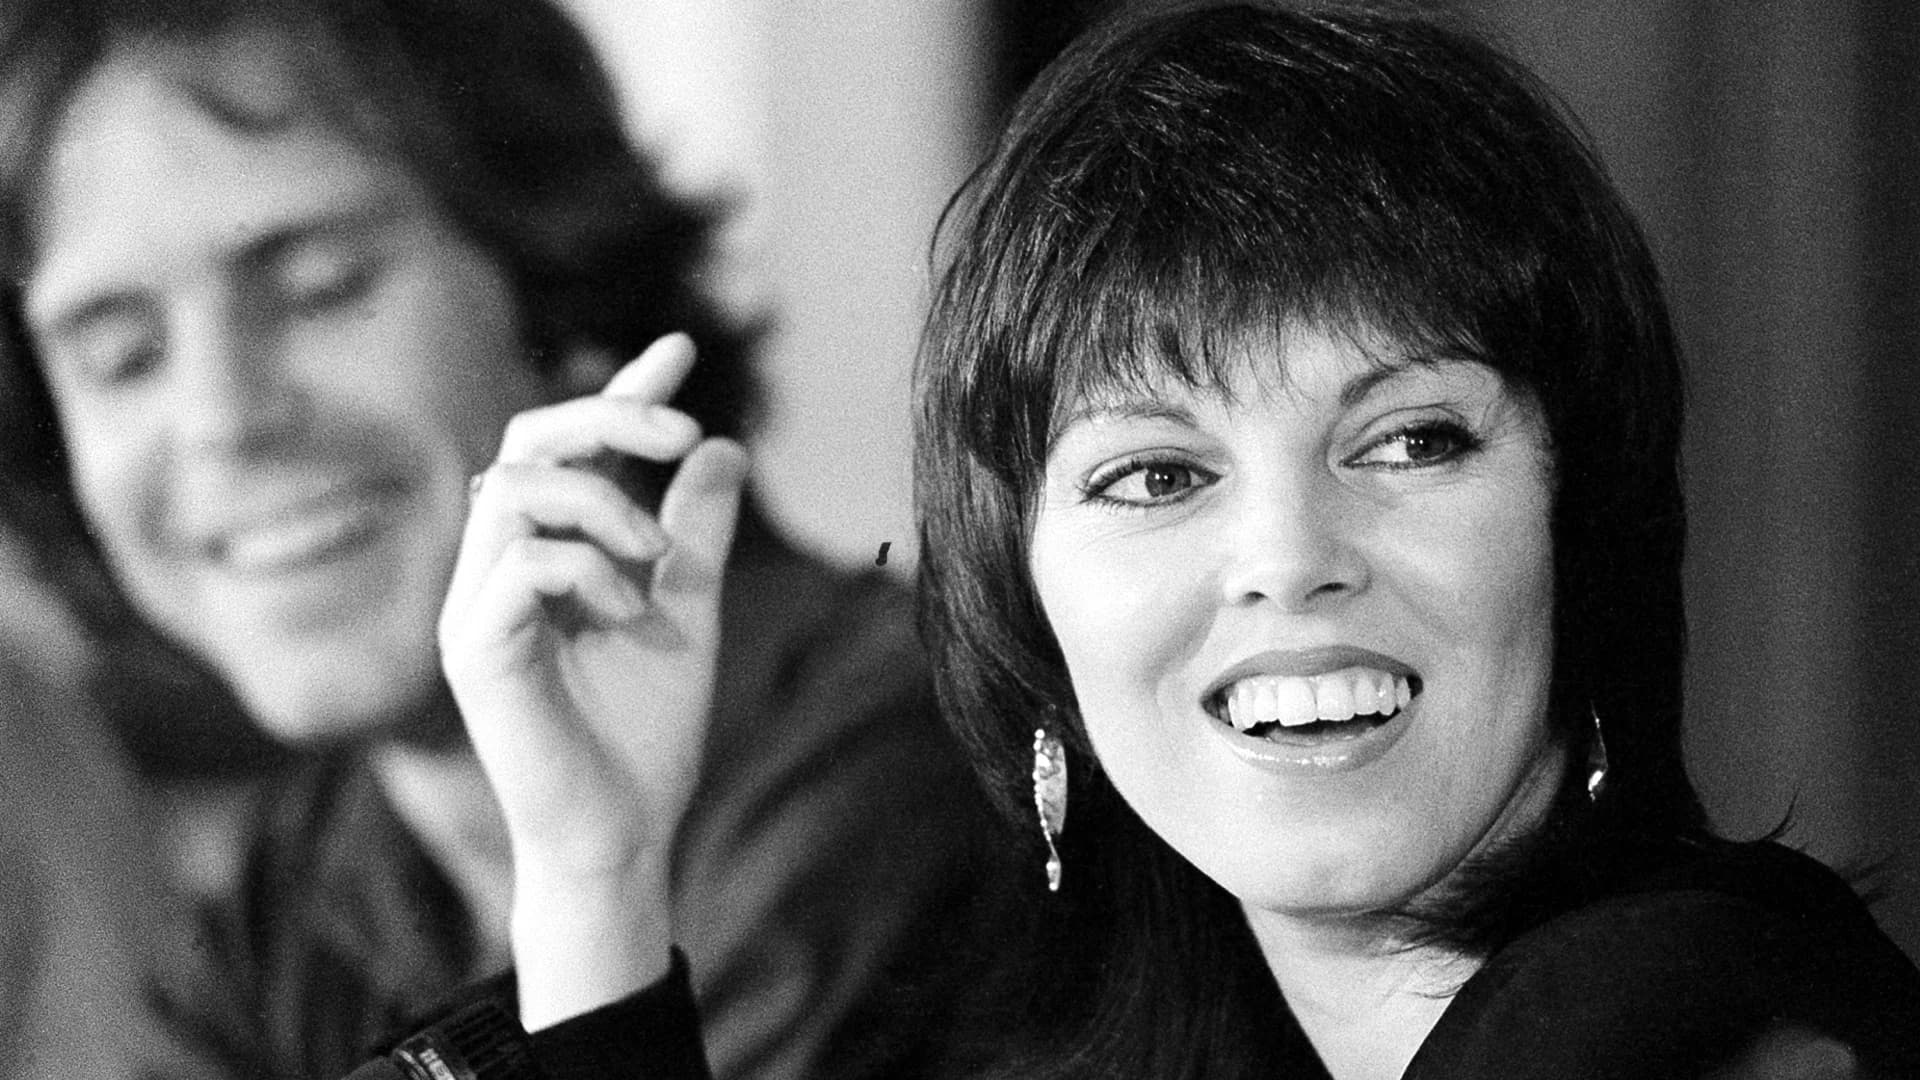 NY's Pat Benatar and Carly Simon to be inducted into Rock and Roll Hall of Fame